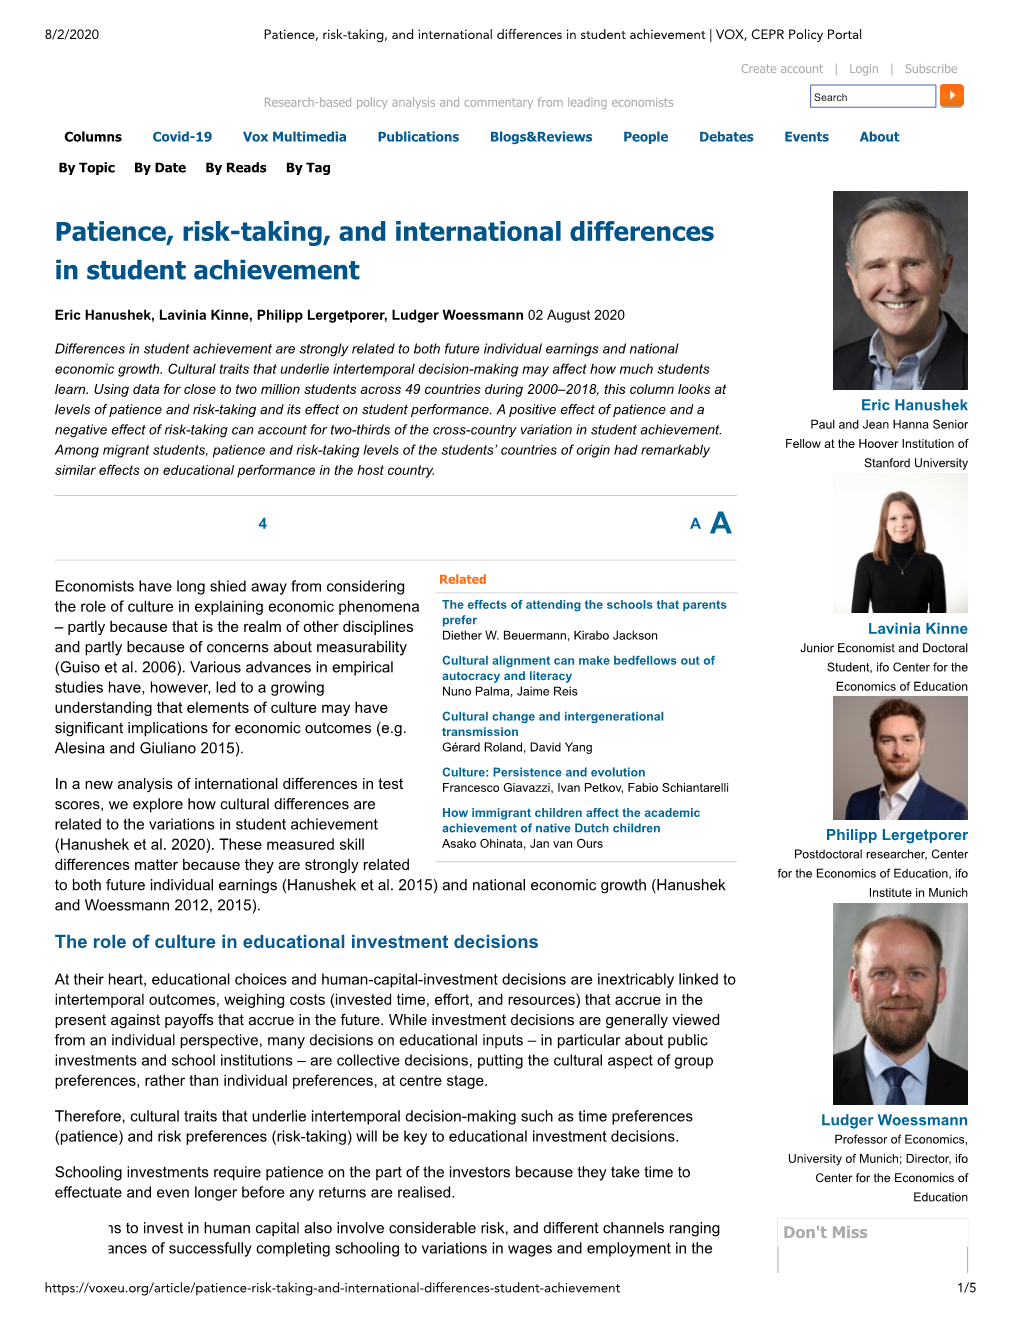 Patience, Risk-Taking, and International Differences in Student Achievement | VOX, CEPR Policy Portal